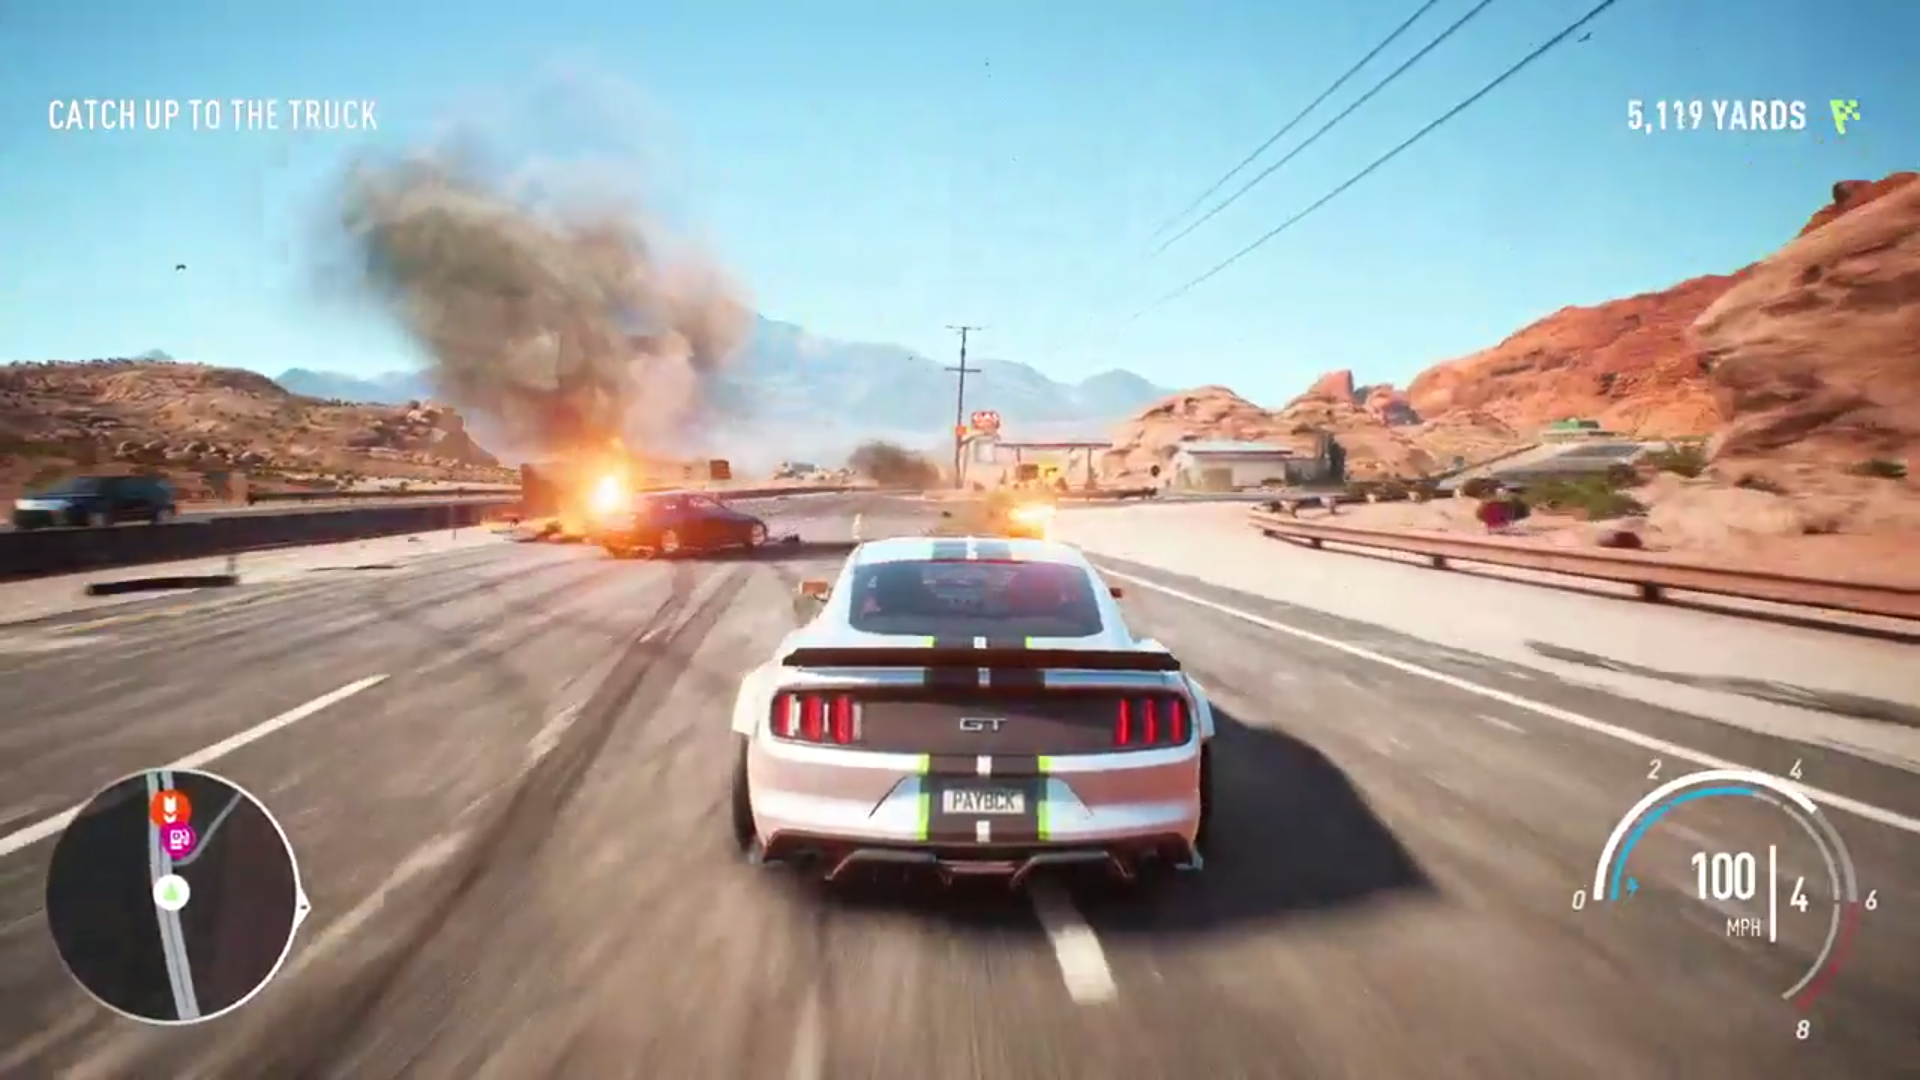 Need for Speed Payback - PS4 Gameplay Trailer